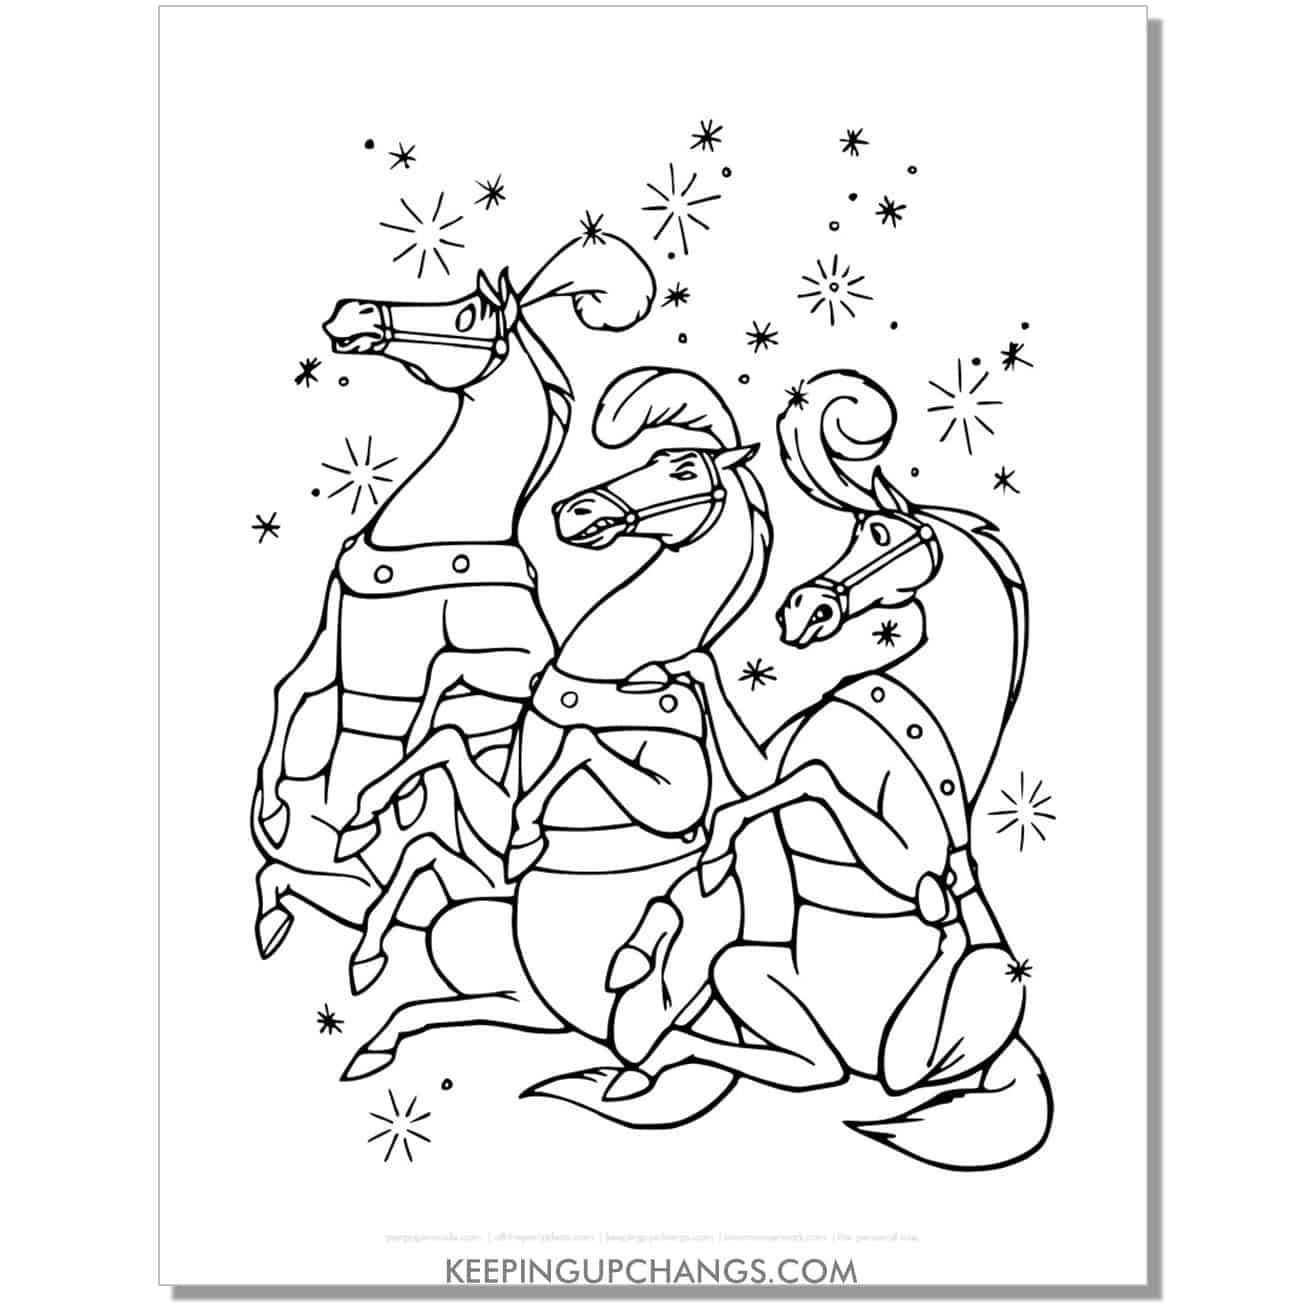 cinderella horses turn to stallions coloring page, sheet.